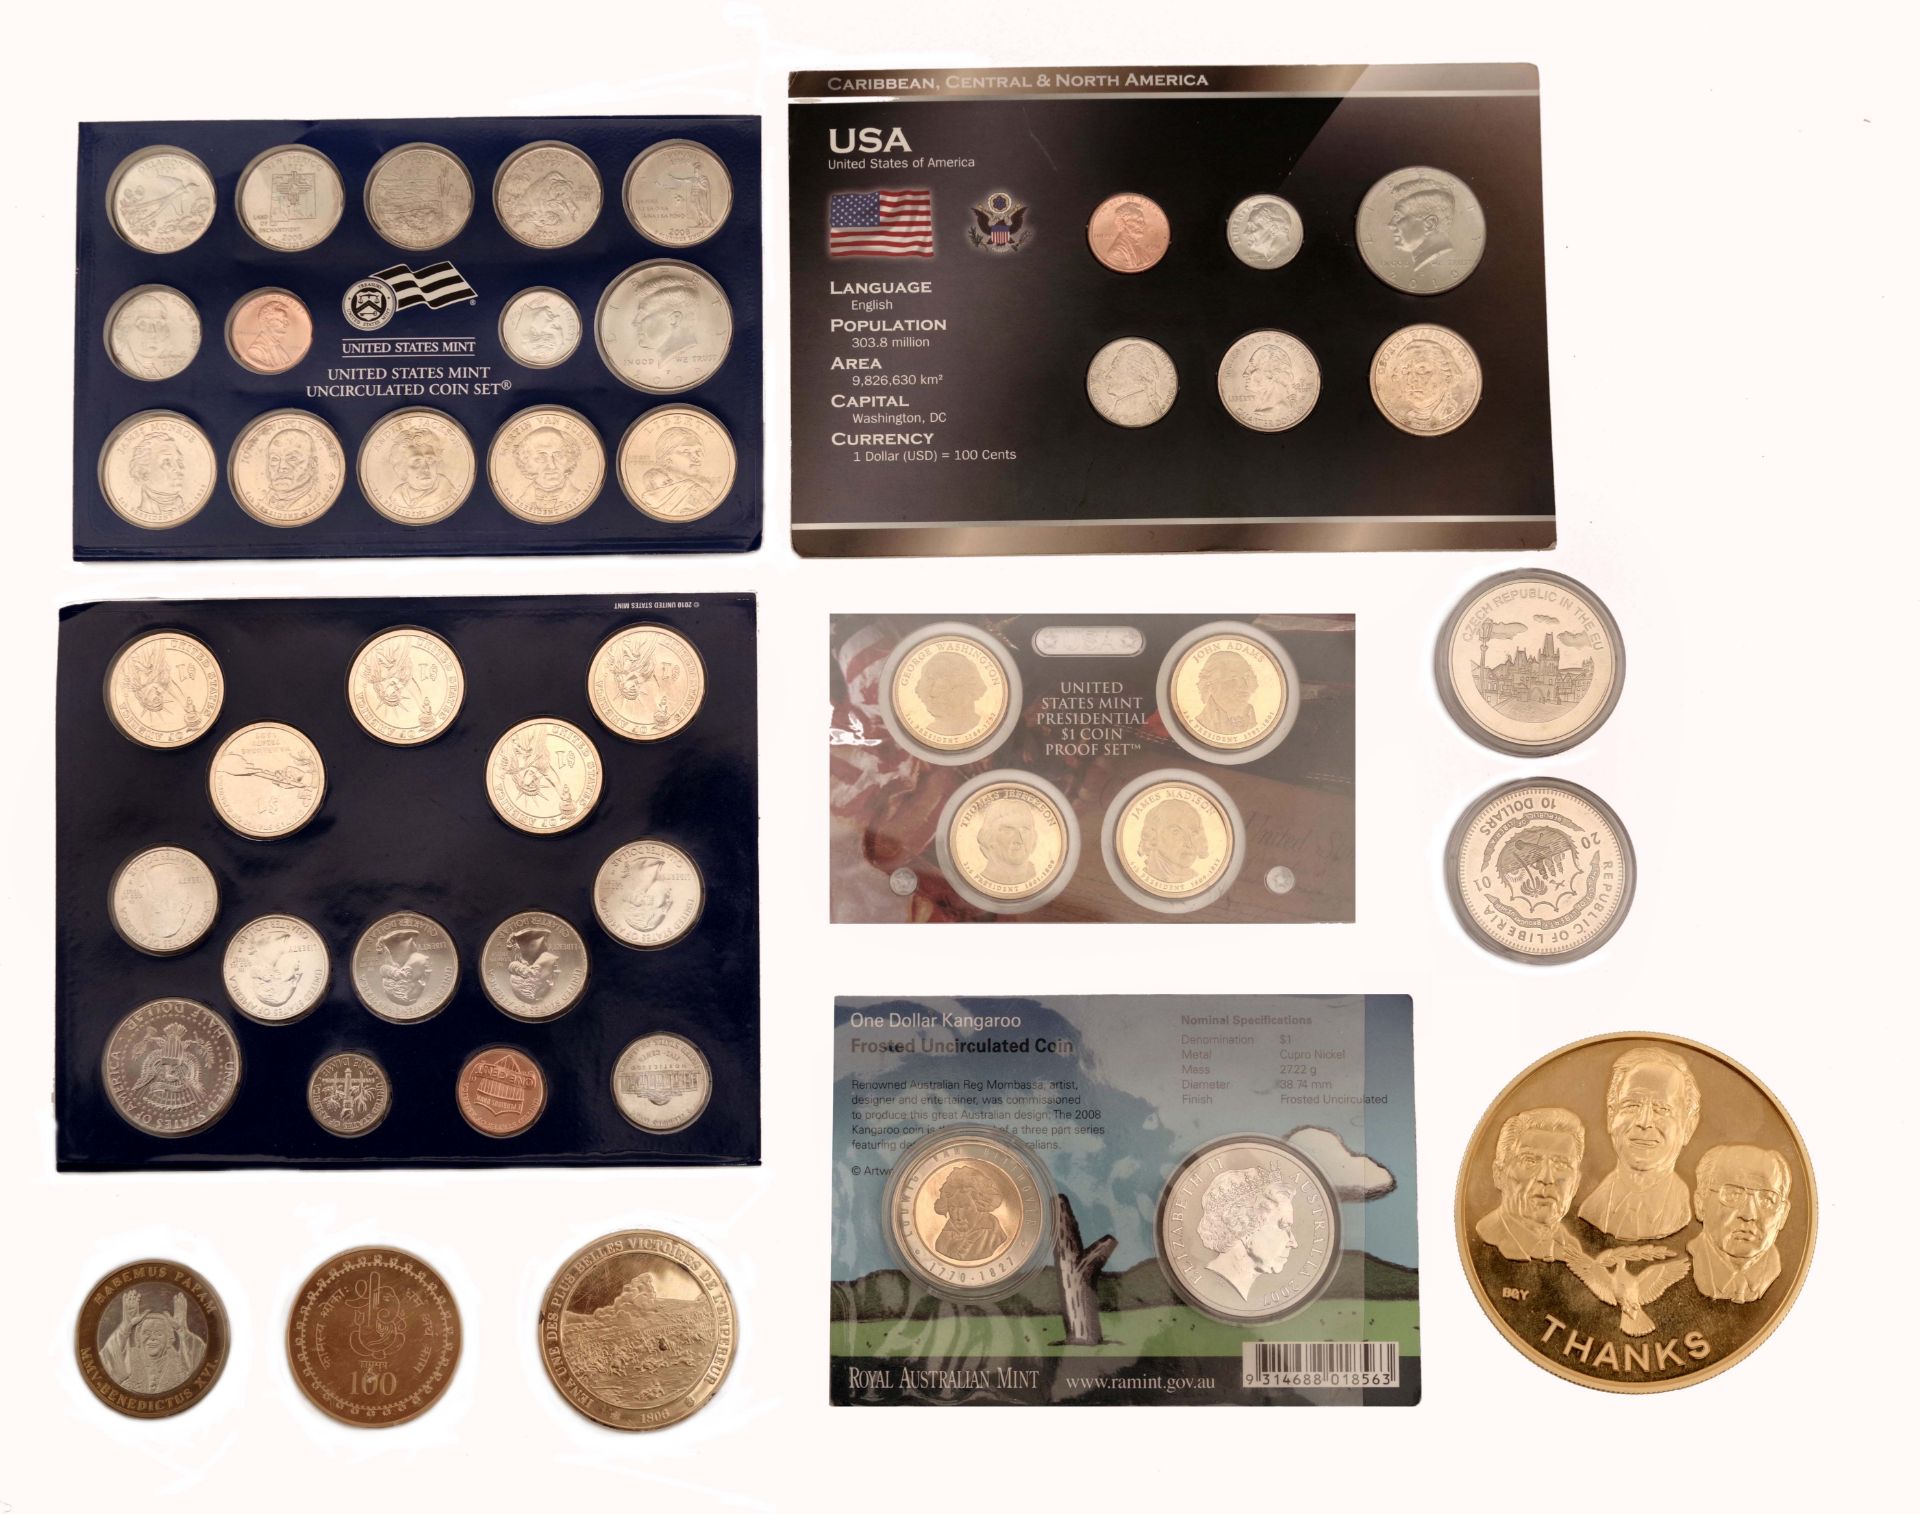 Mint coins and medals